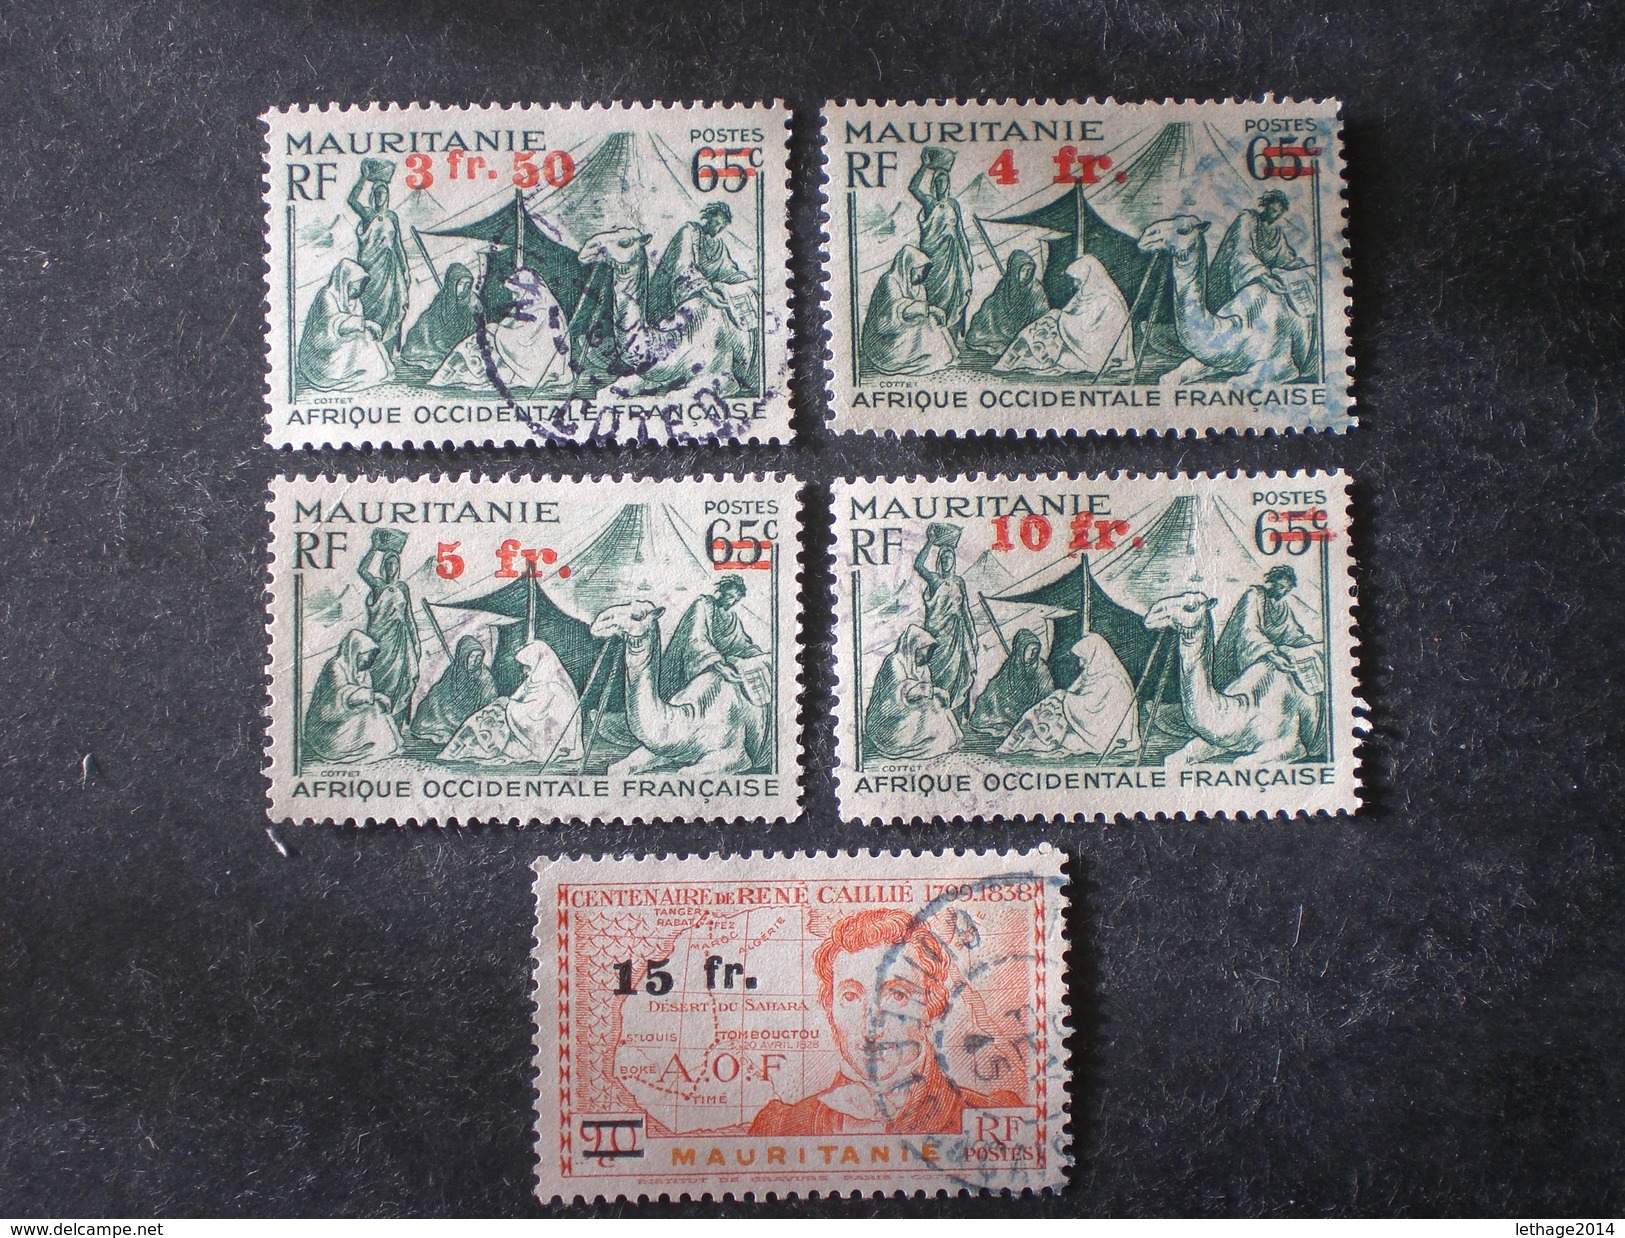 AOF MAURITANIA MAURITANIE موريتانيا Mauritanië 1944 Issues Of 1938 And 1939 Surcharged - Gebruikt